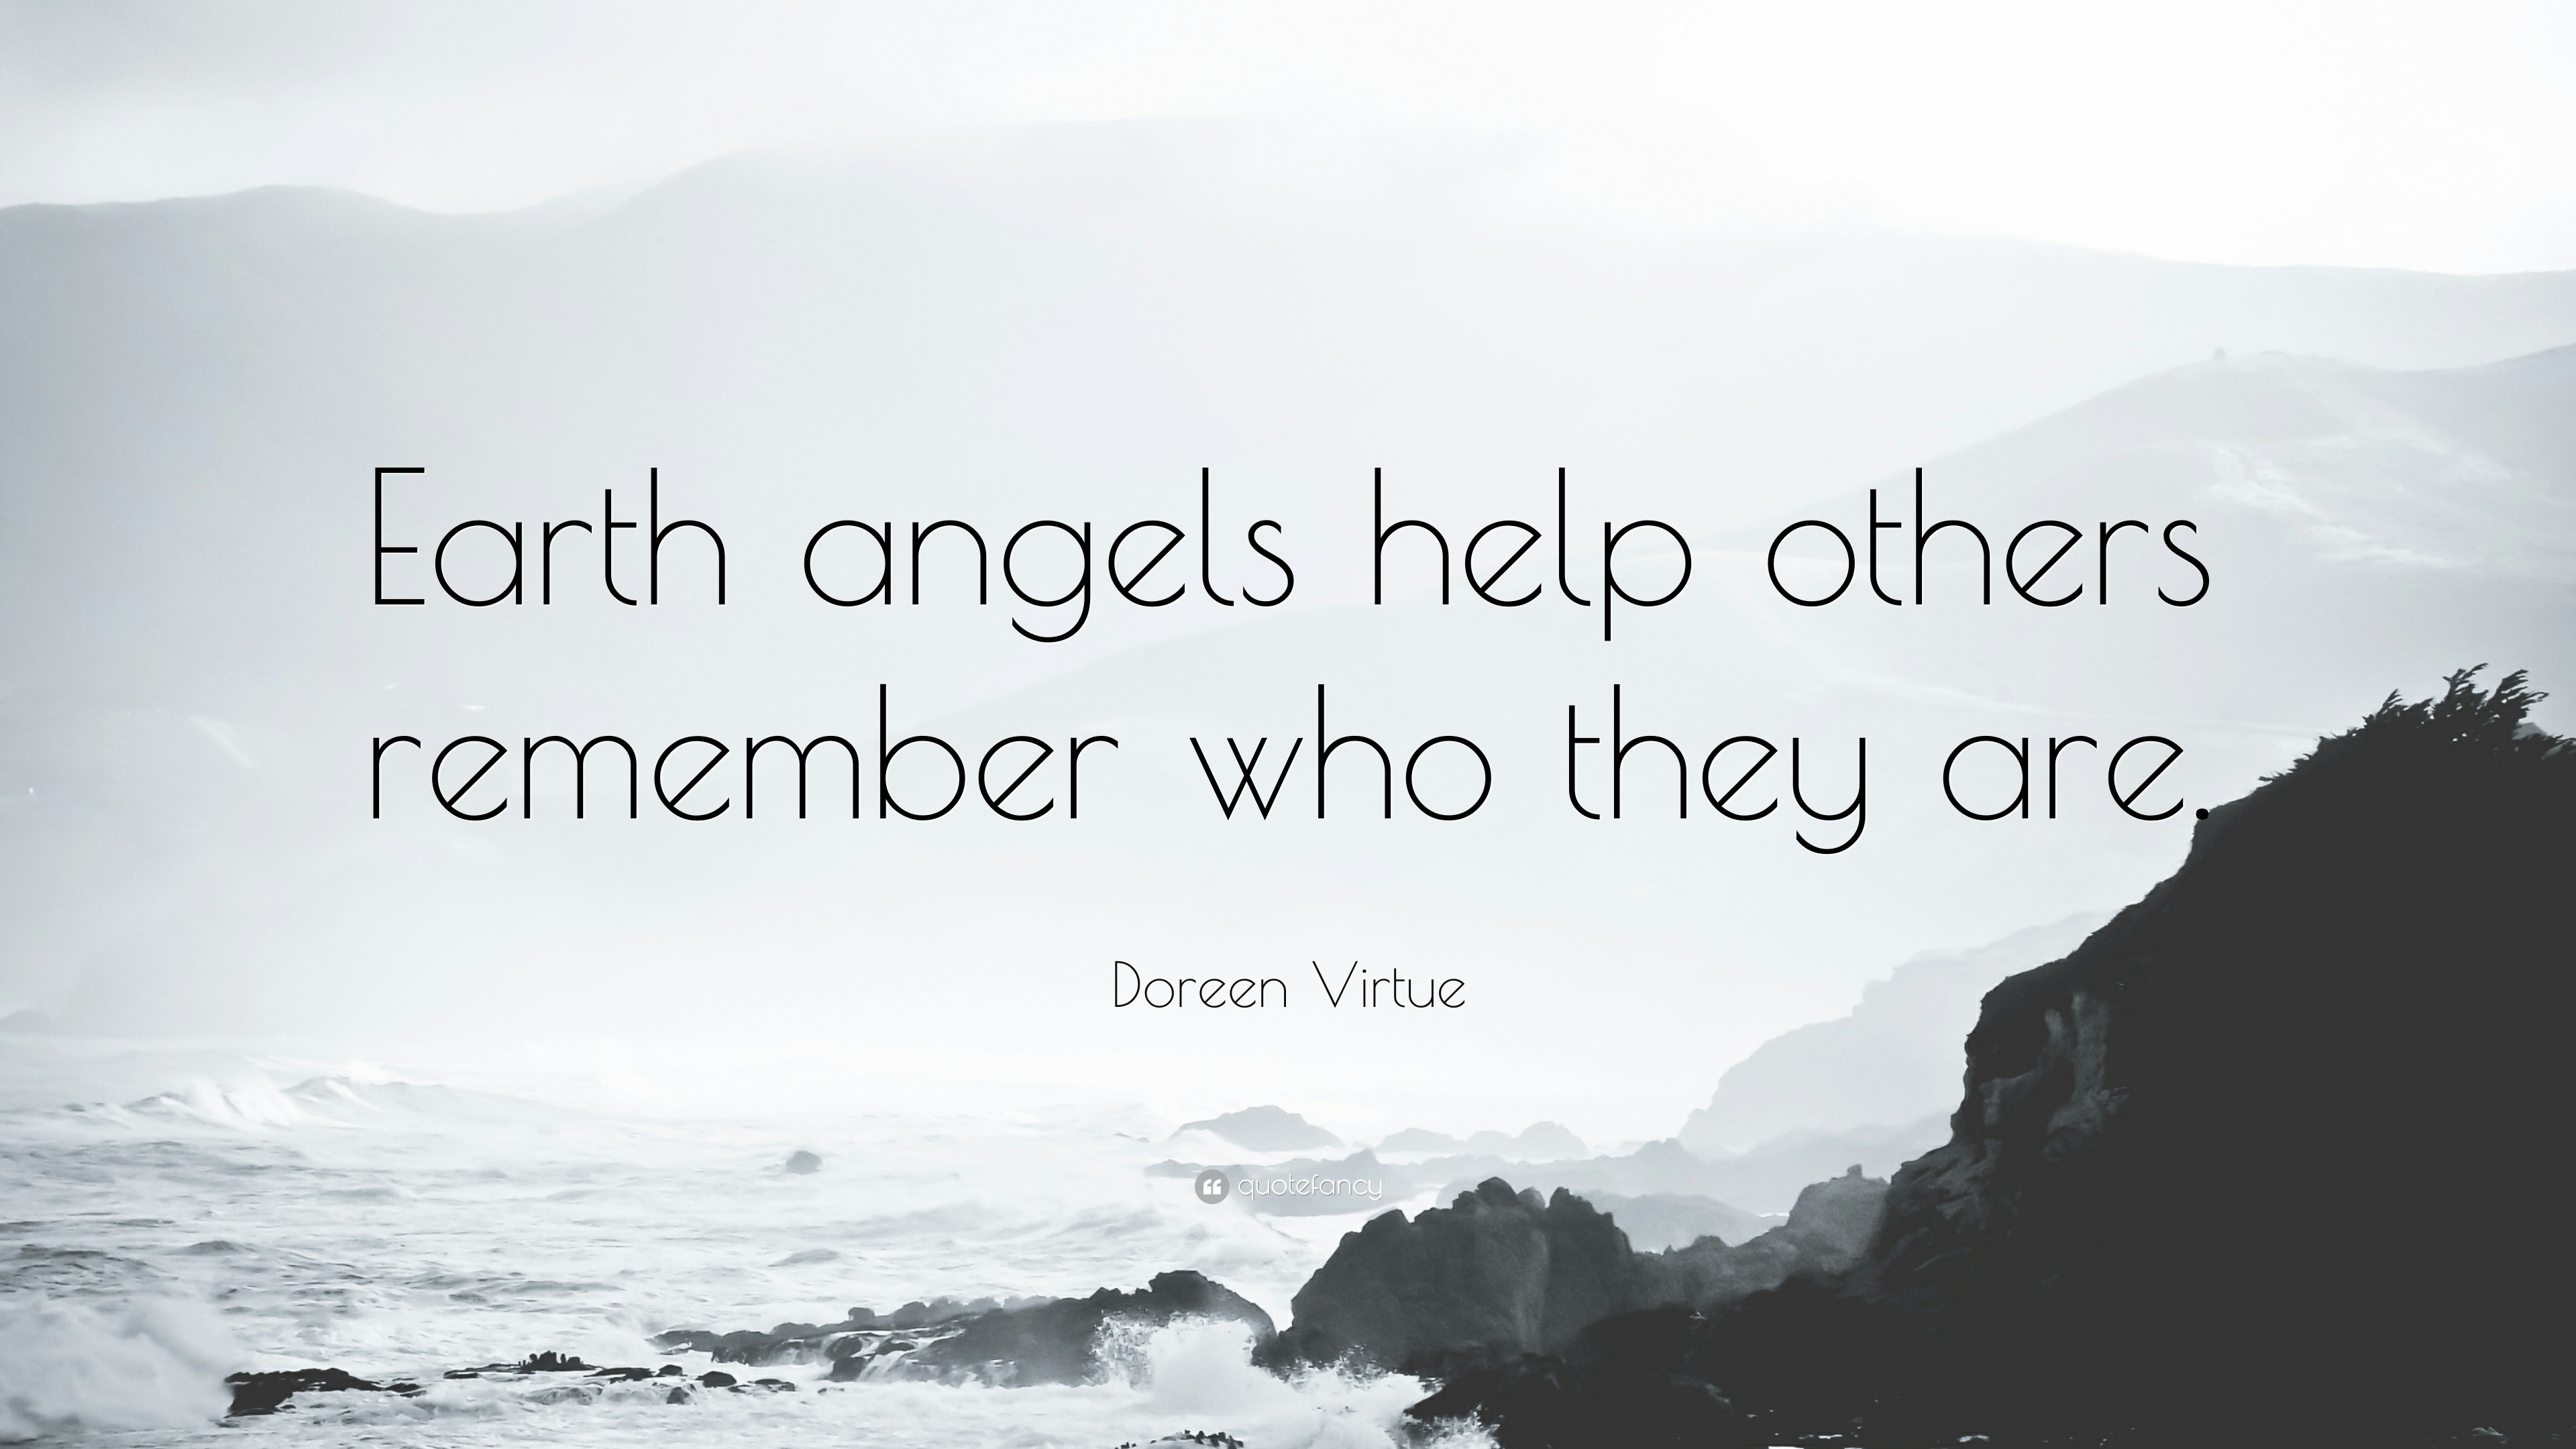 Doreen Virtue Quote “Earth angels help others remember